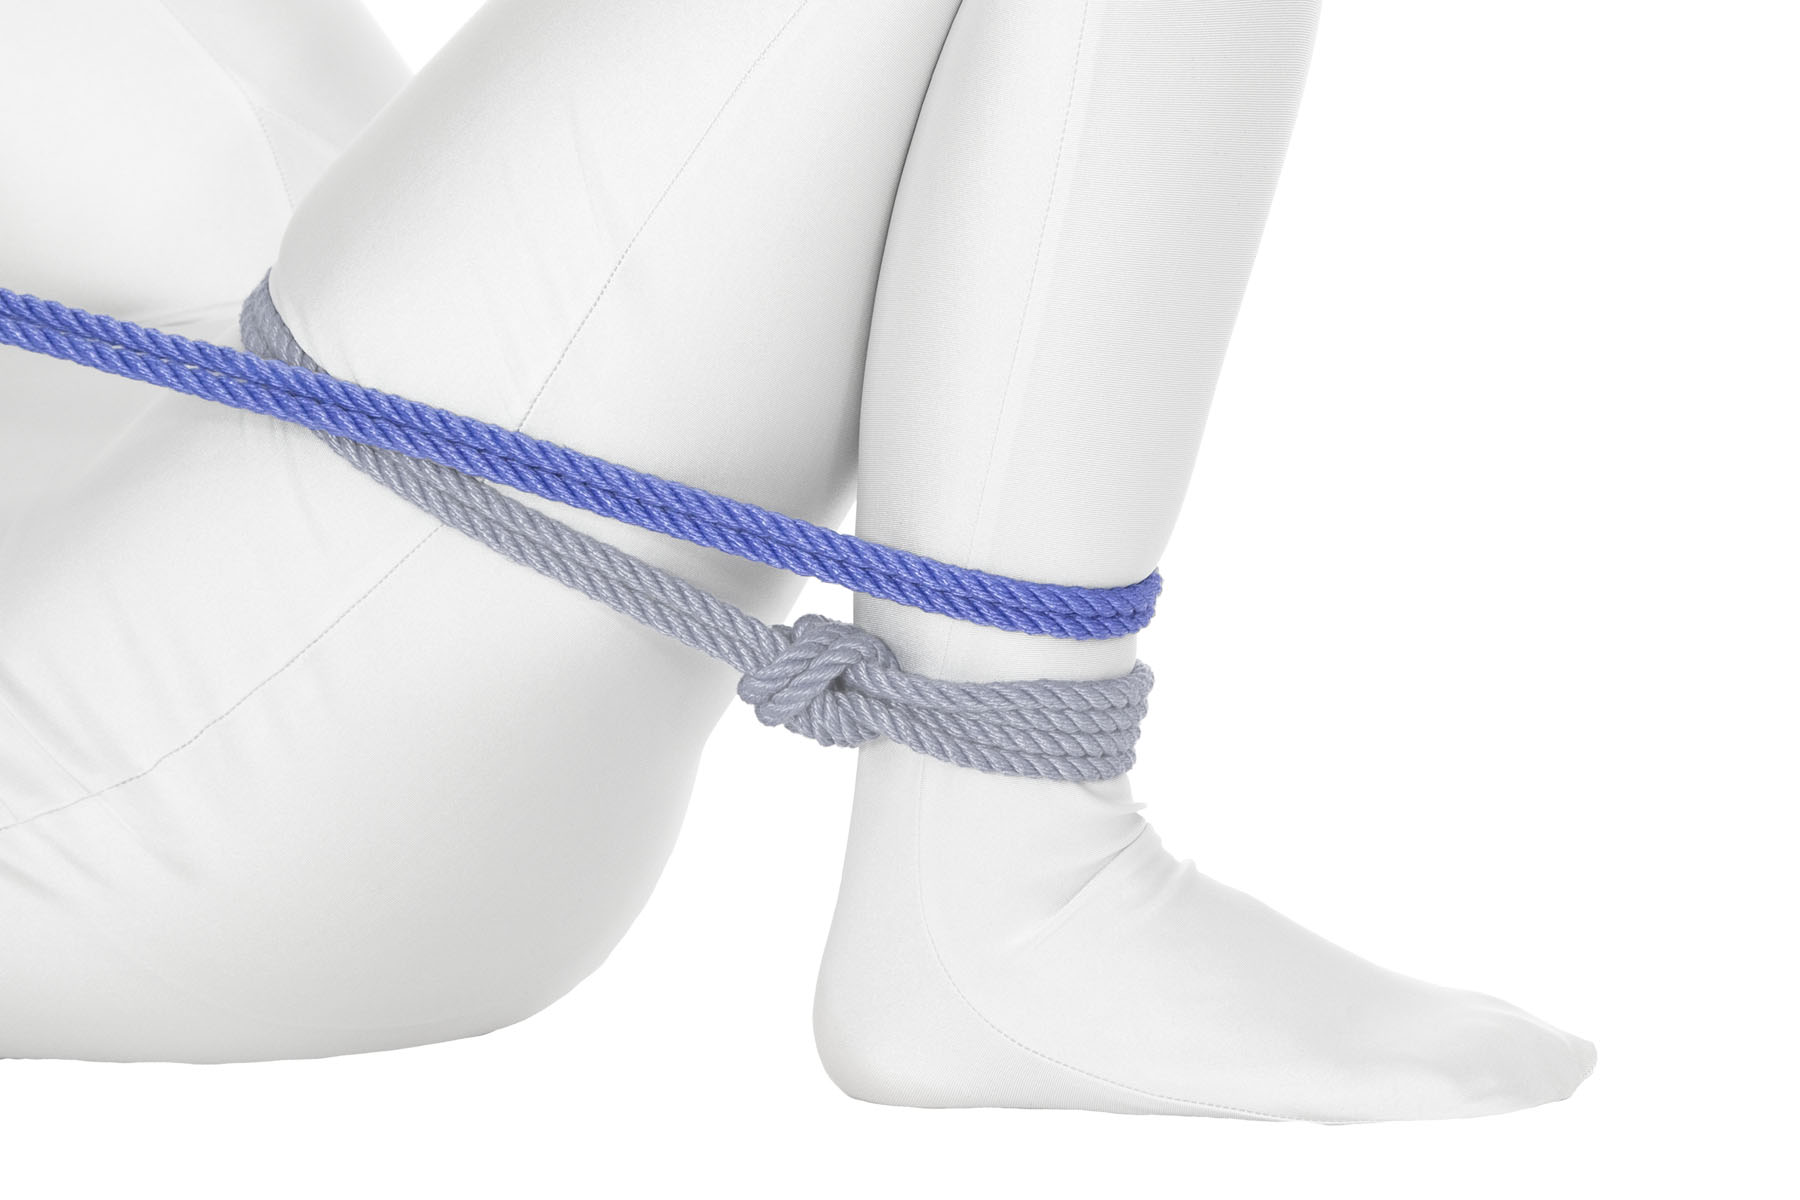 The rope makes a full clockwise pass around the leg, going over the thigh right below the crotch and back down to the ankle. It comes around the shin just above the single column tie.